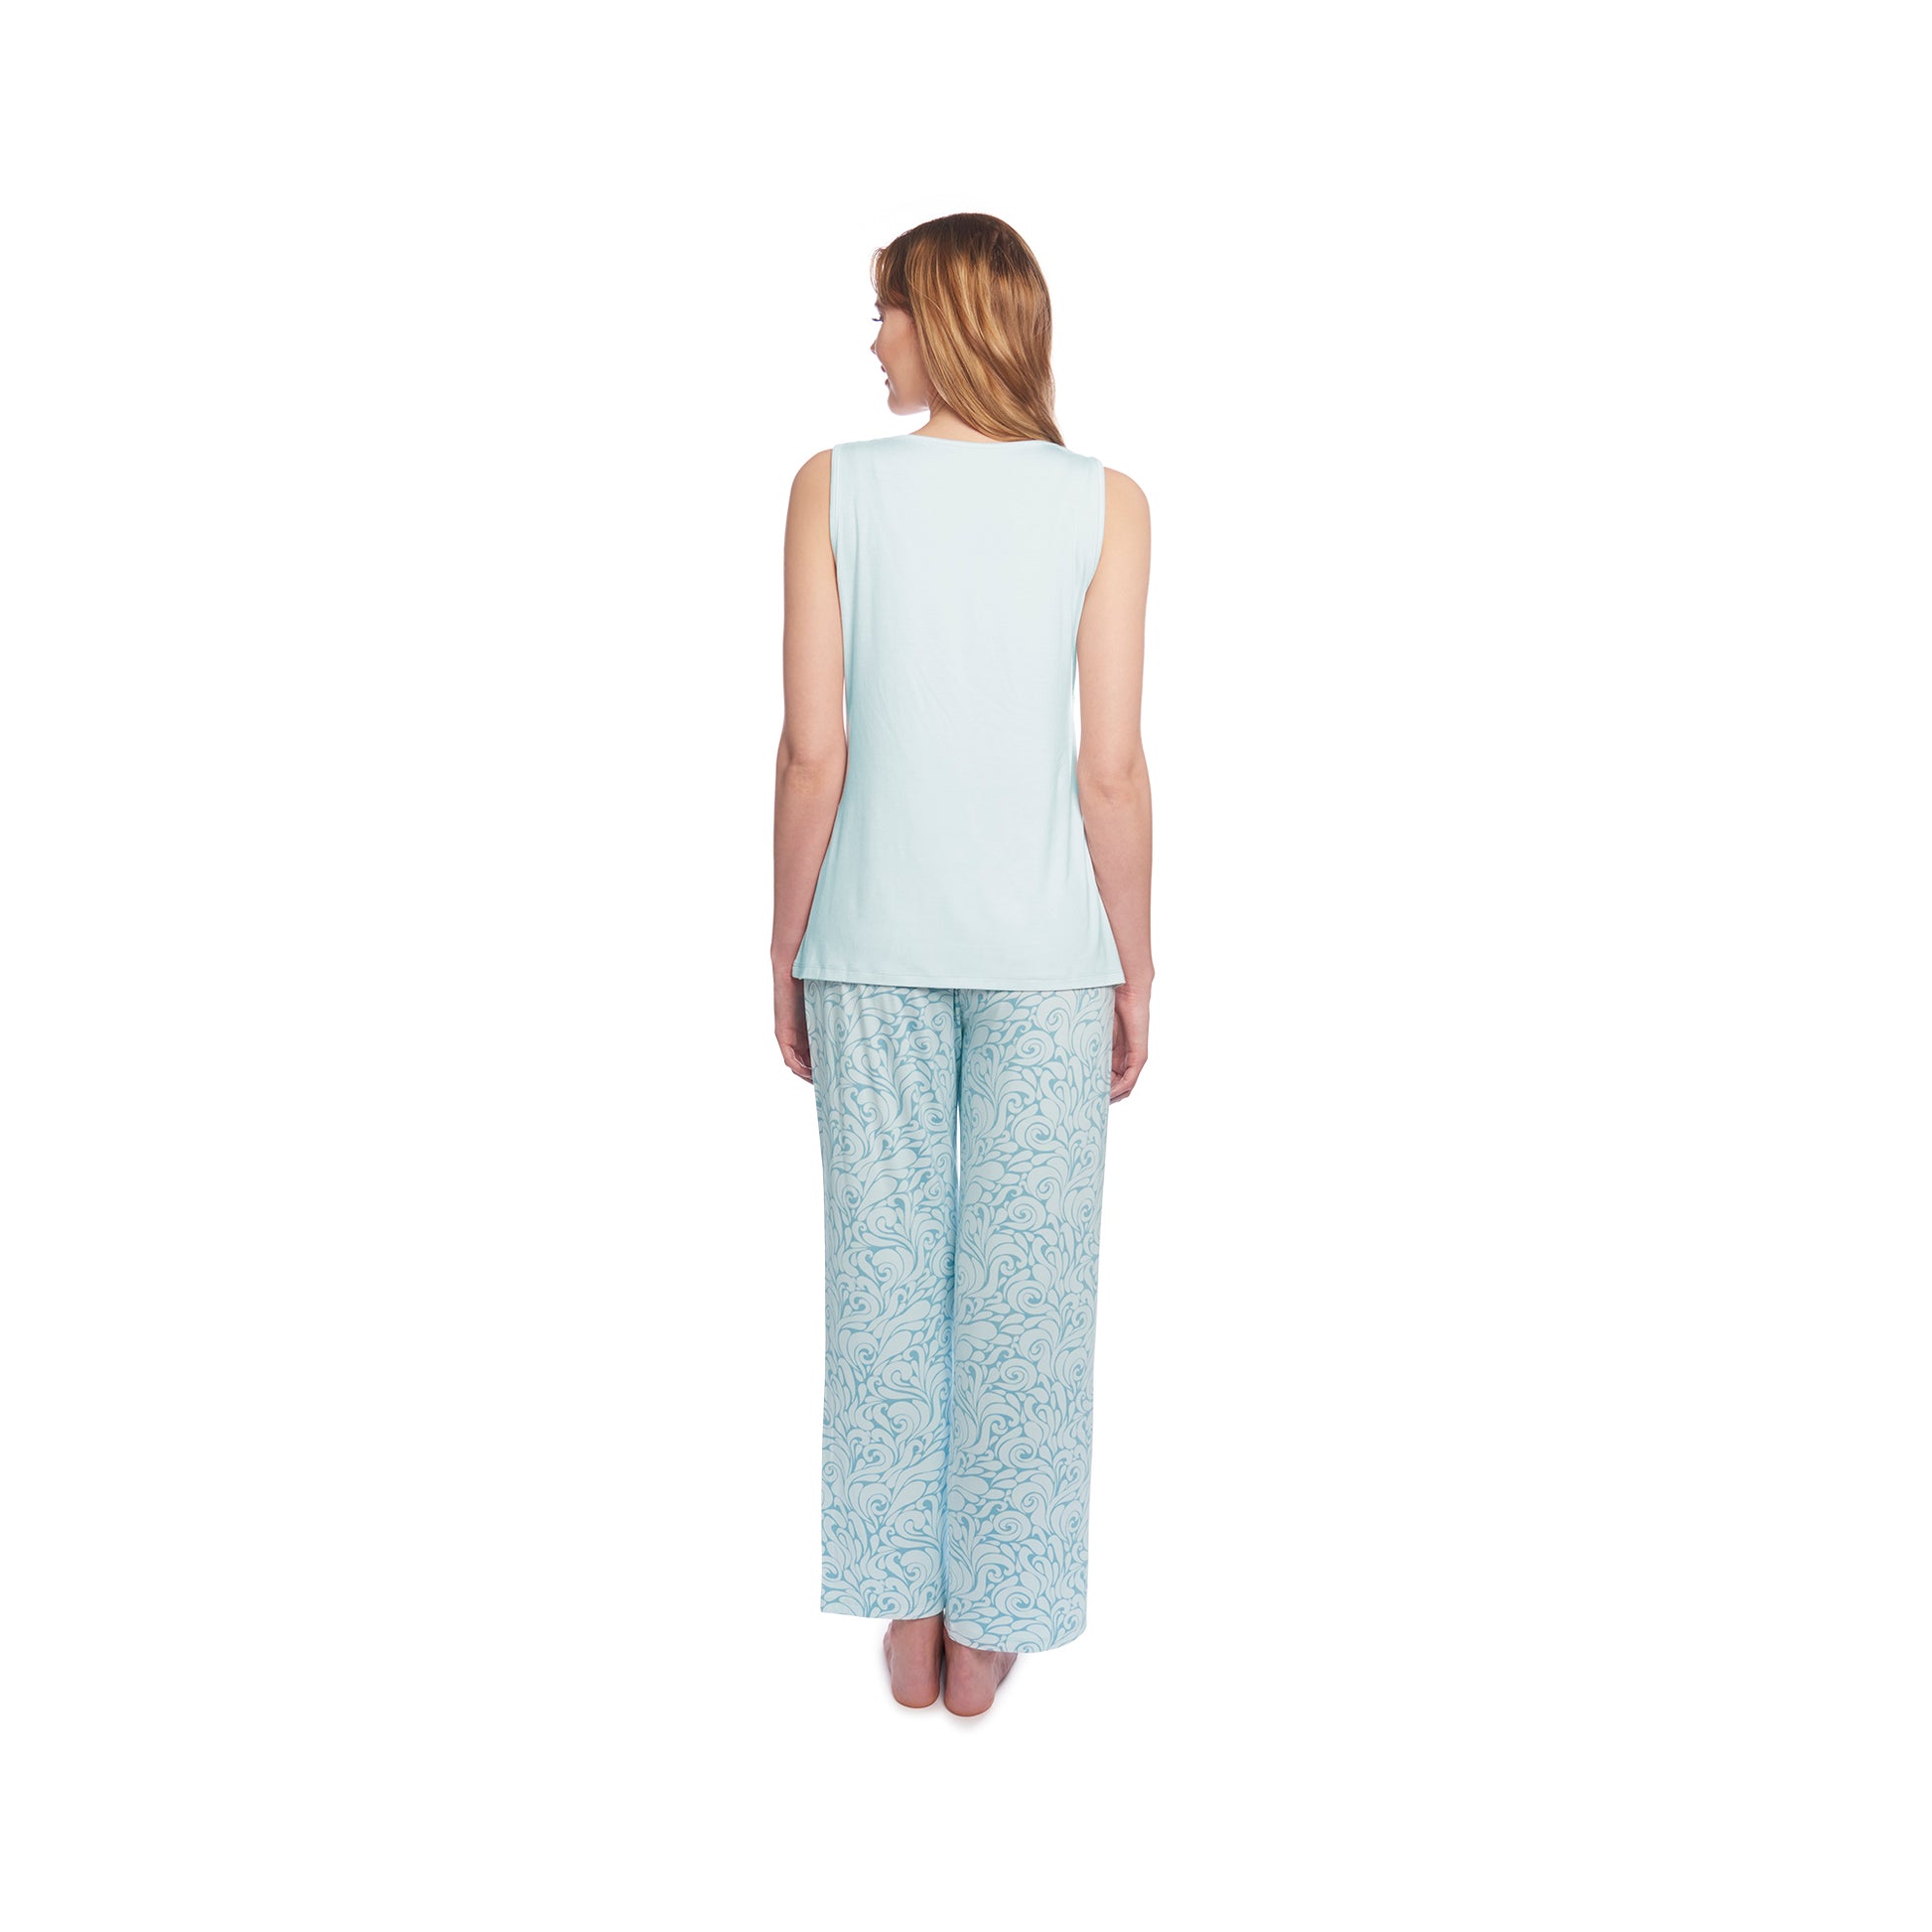 Waves Analise 5-Piece Set, back shot of woman wearing tank top and pant.